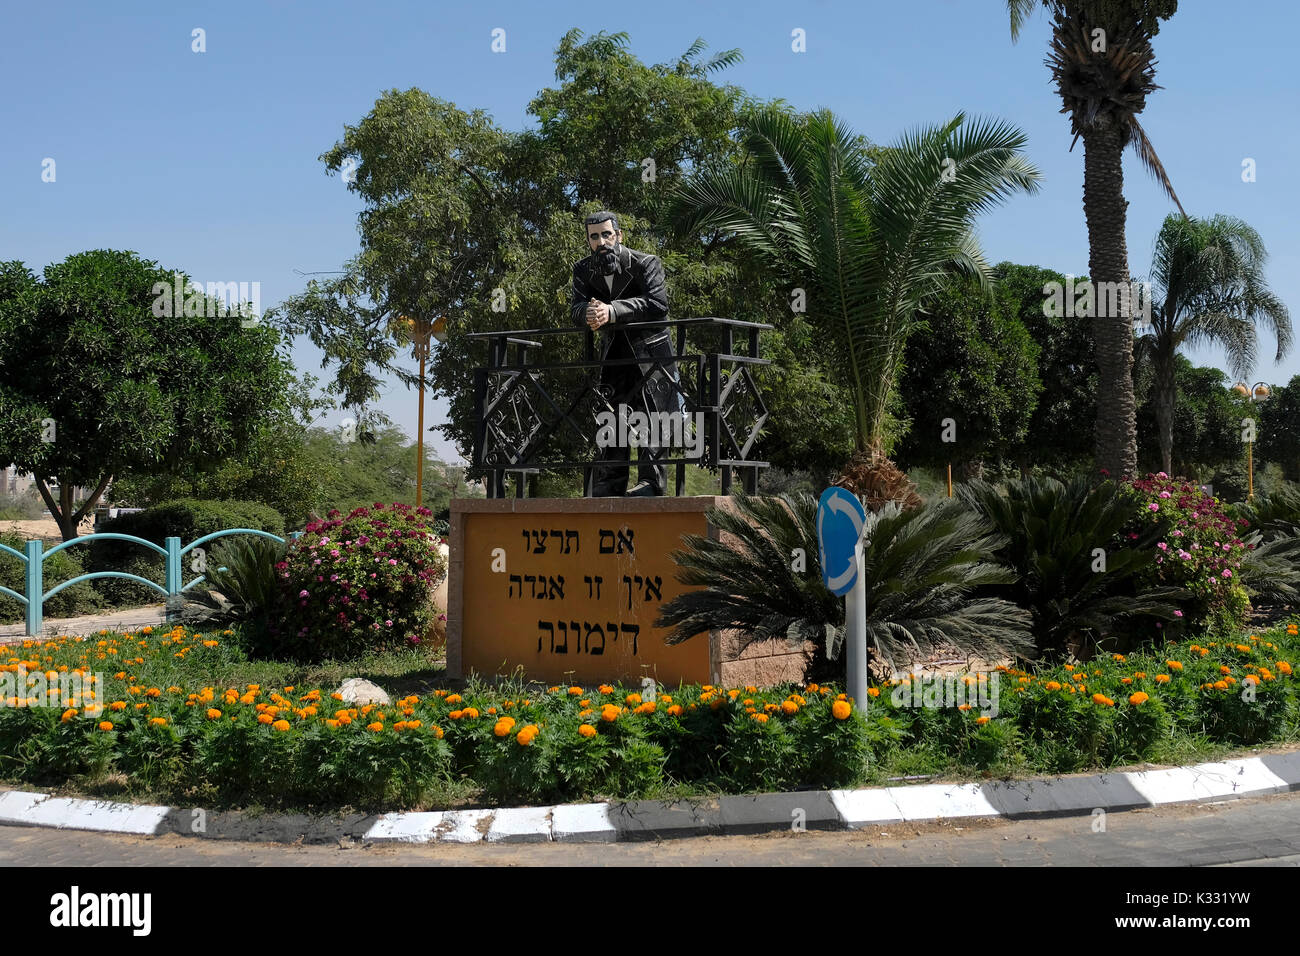 A sculpted figure depicting the founder of Zionism Theodor Herzl by Israeli artists Israel Benita ( 2012 ) at a roundabout in Herzl or Hertzel street the city of Dimona in the Negev desert southern Israel Stock Photo